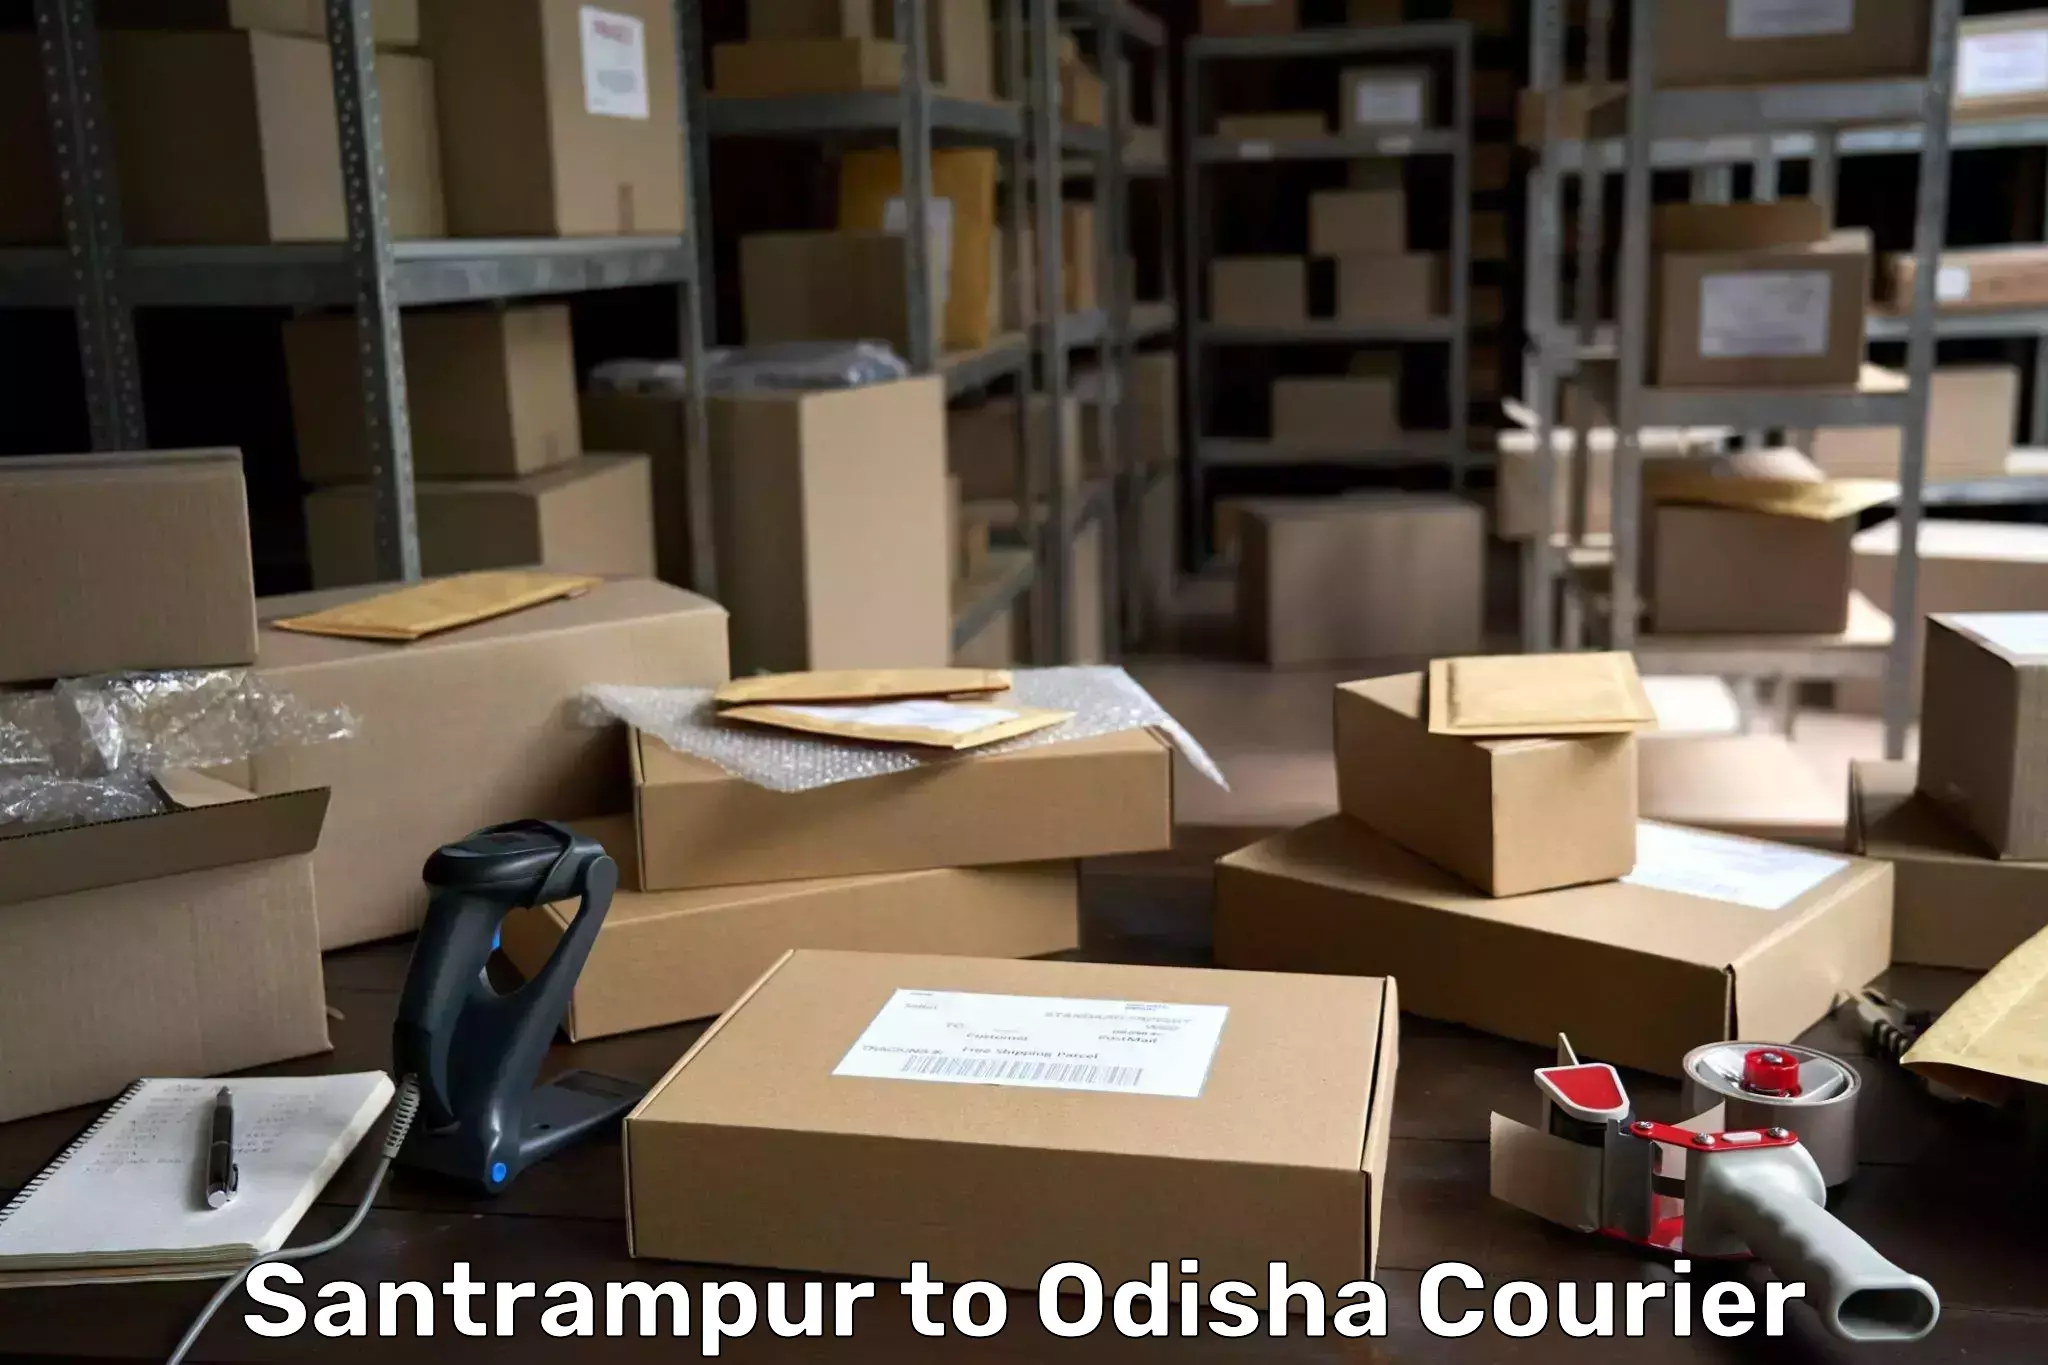 Reliable parcel services Santrampur to Odisha